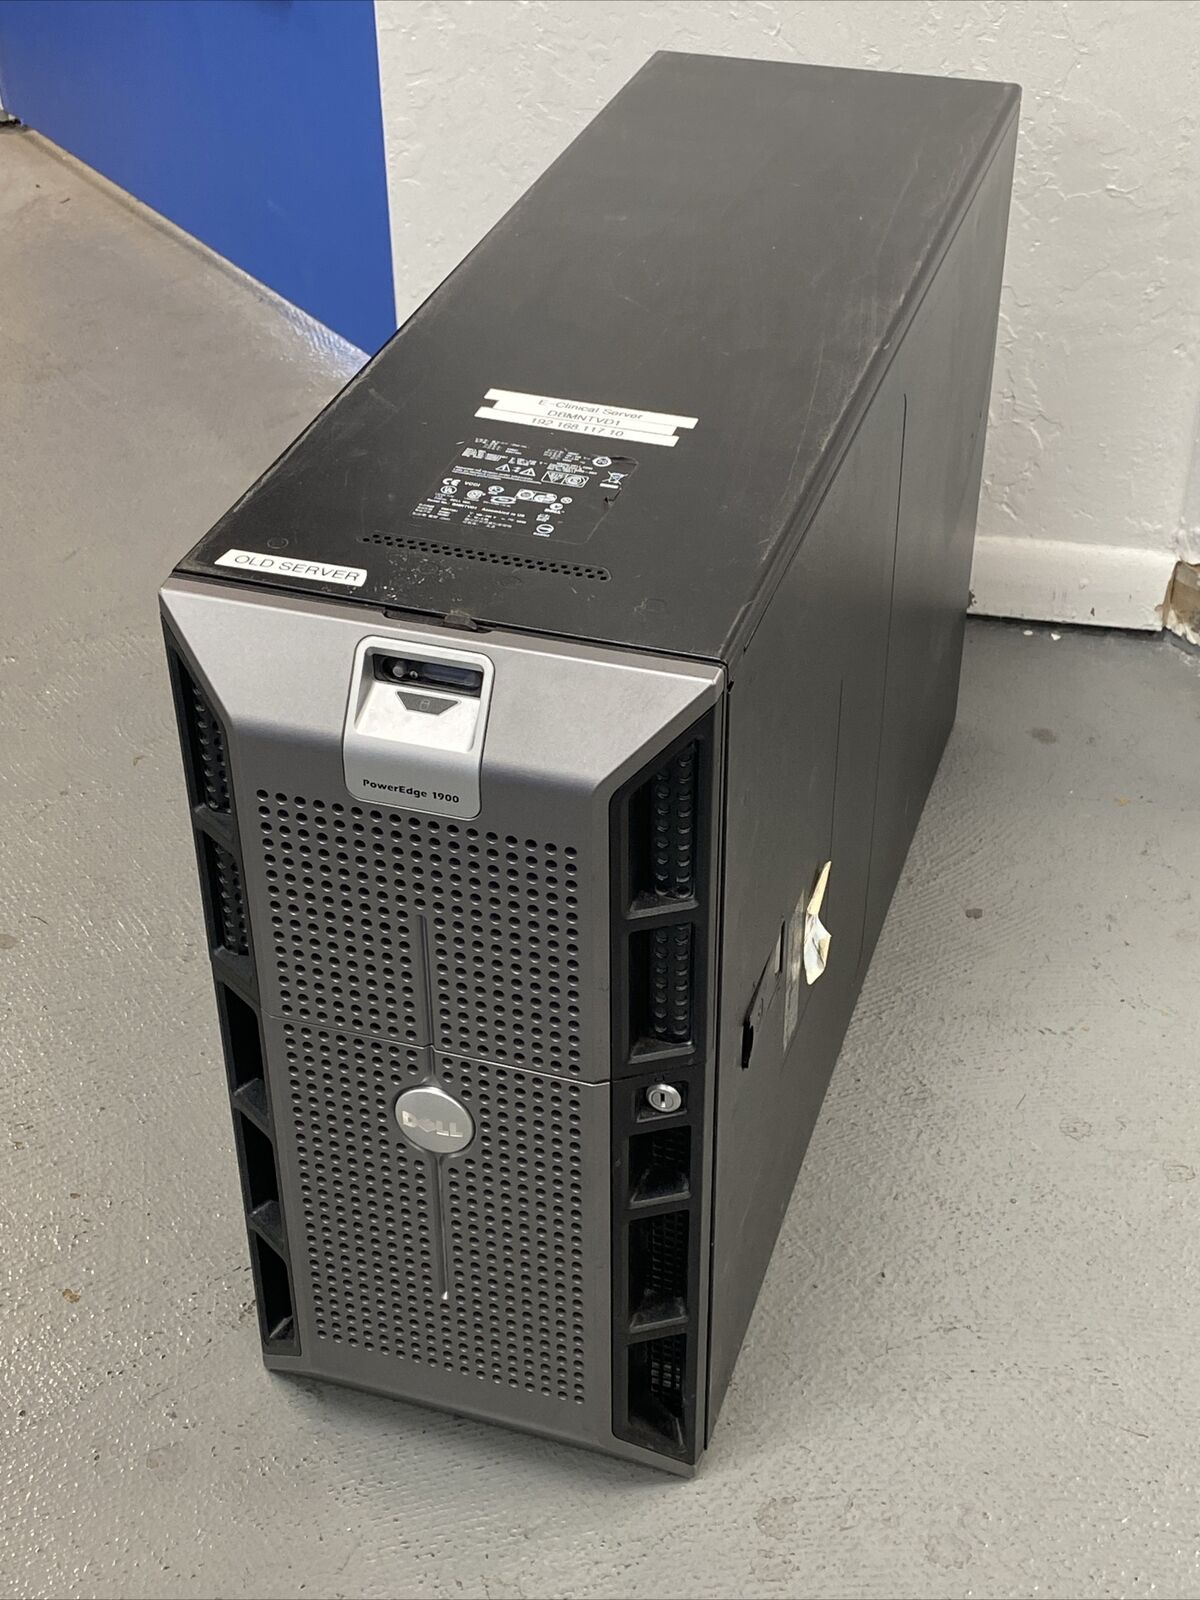 Dell PowerEdge 1900 Server Xeon 5130 2.00GHz 4GB RAM - NO HDDs